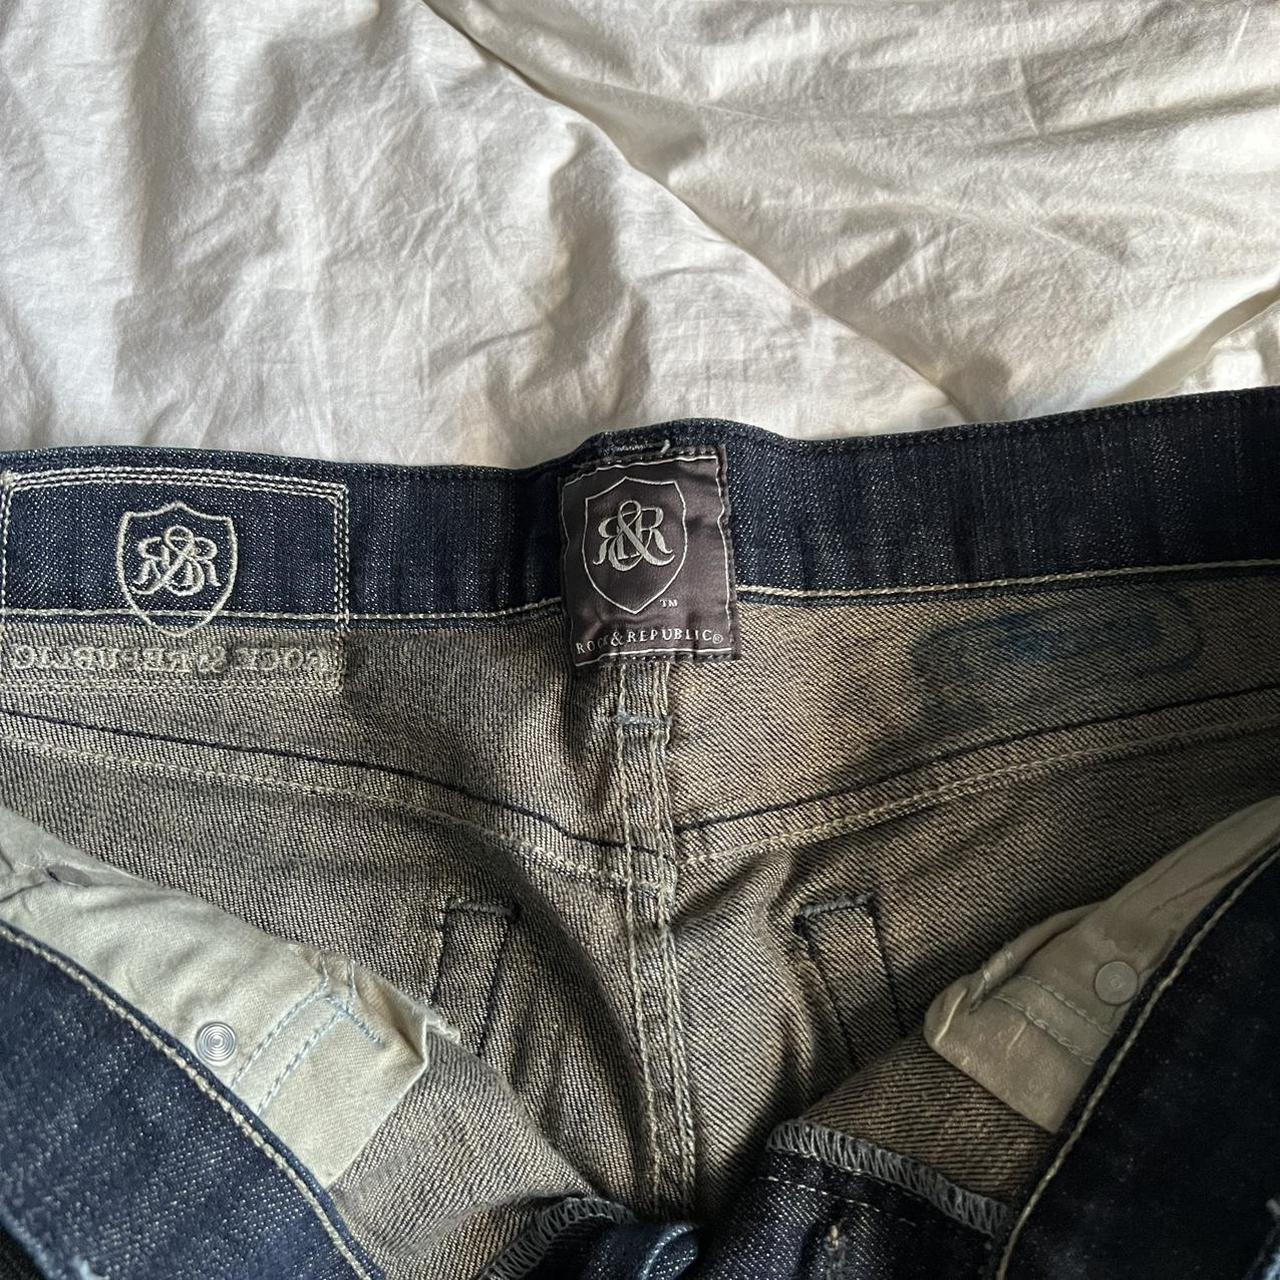 Rock and Republic Men's Navy and Blue Jeans (3)